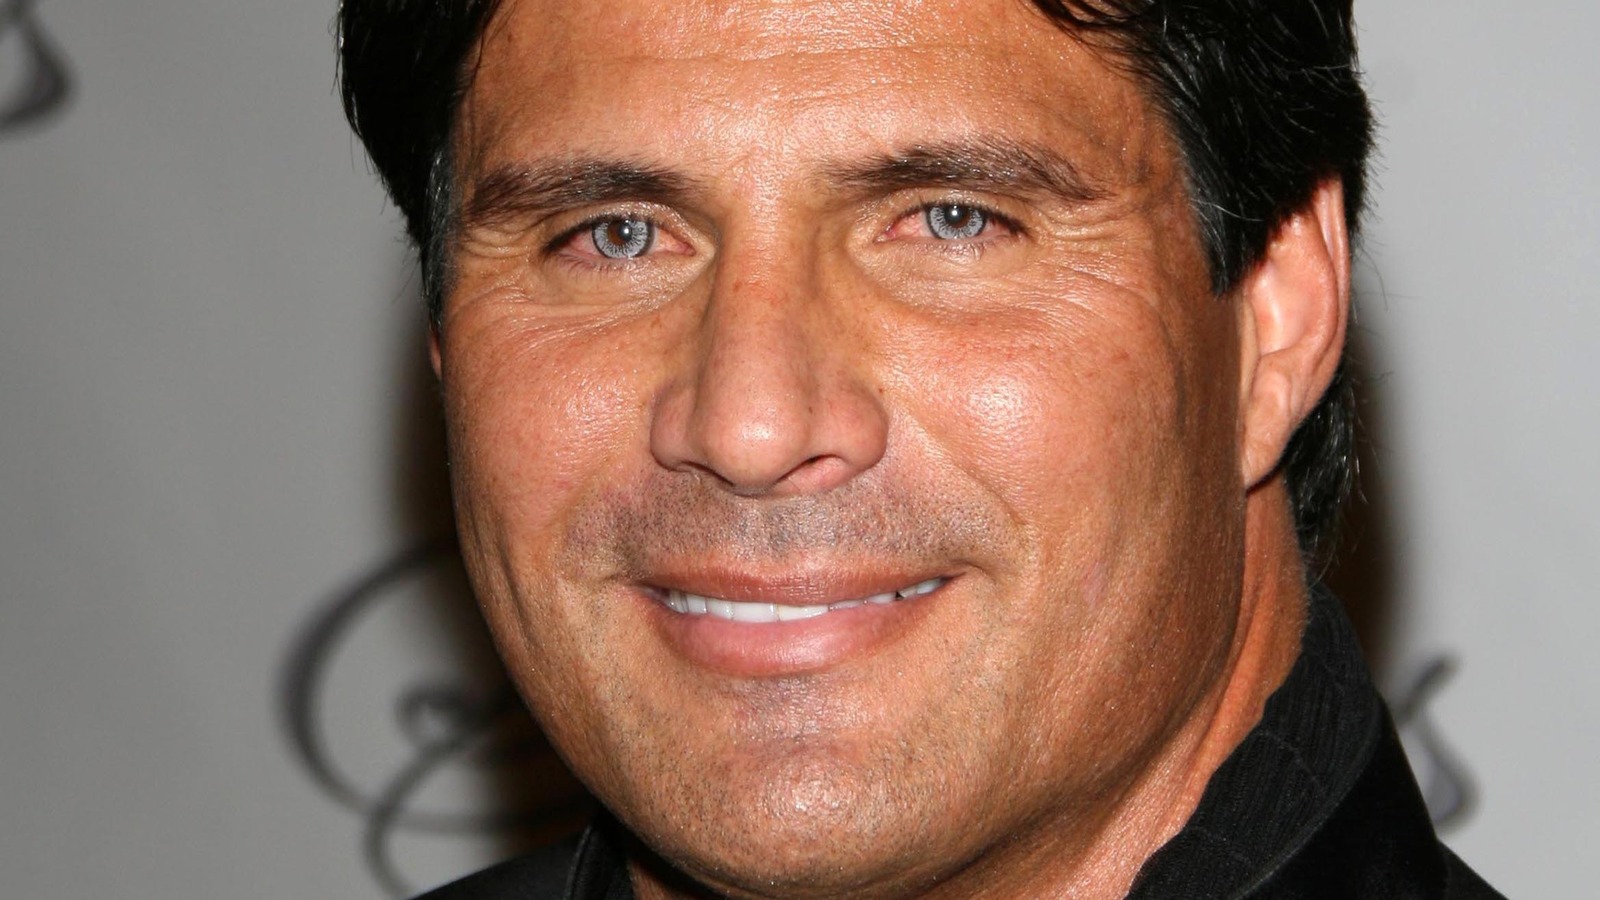 Jose Canseco Just Dropped The Hammer, Did He Hit The Nail On The Head?